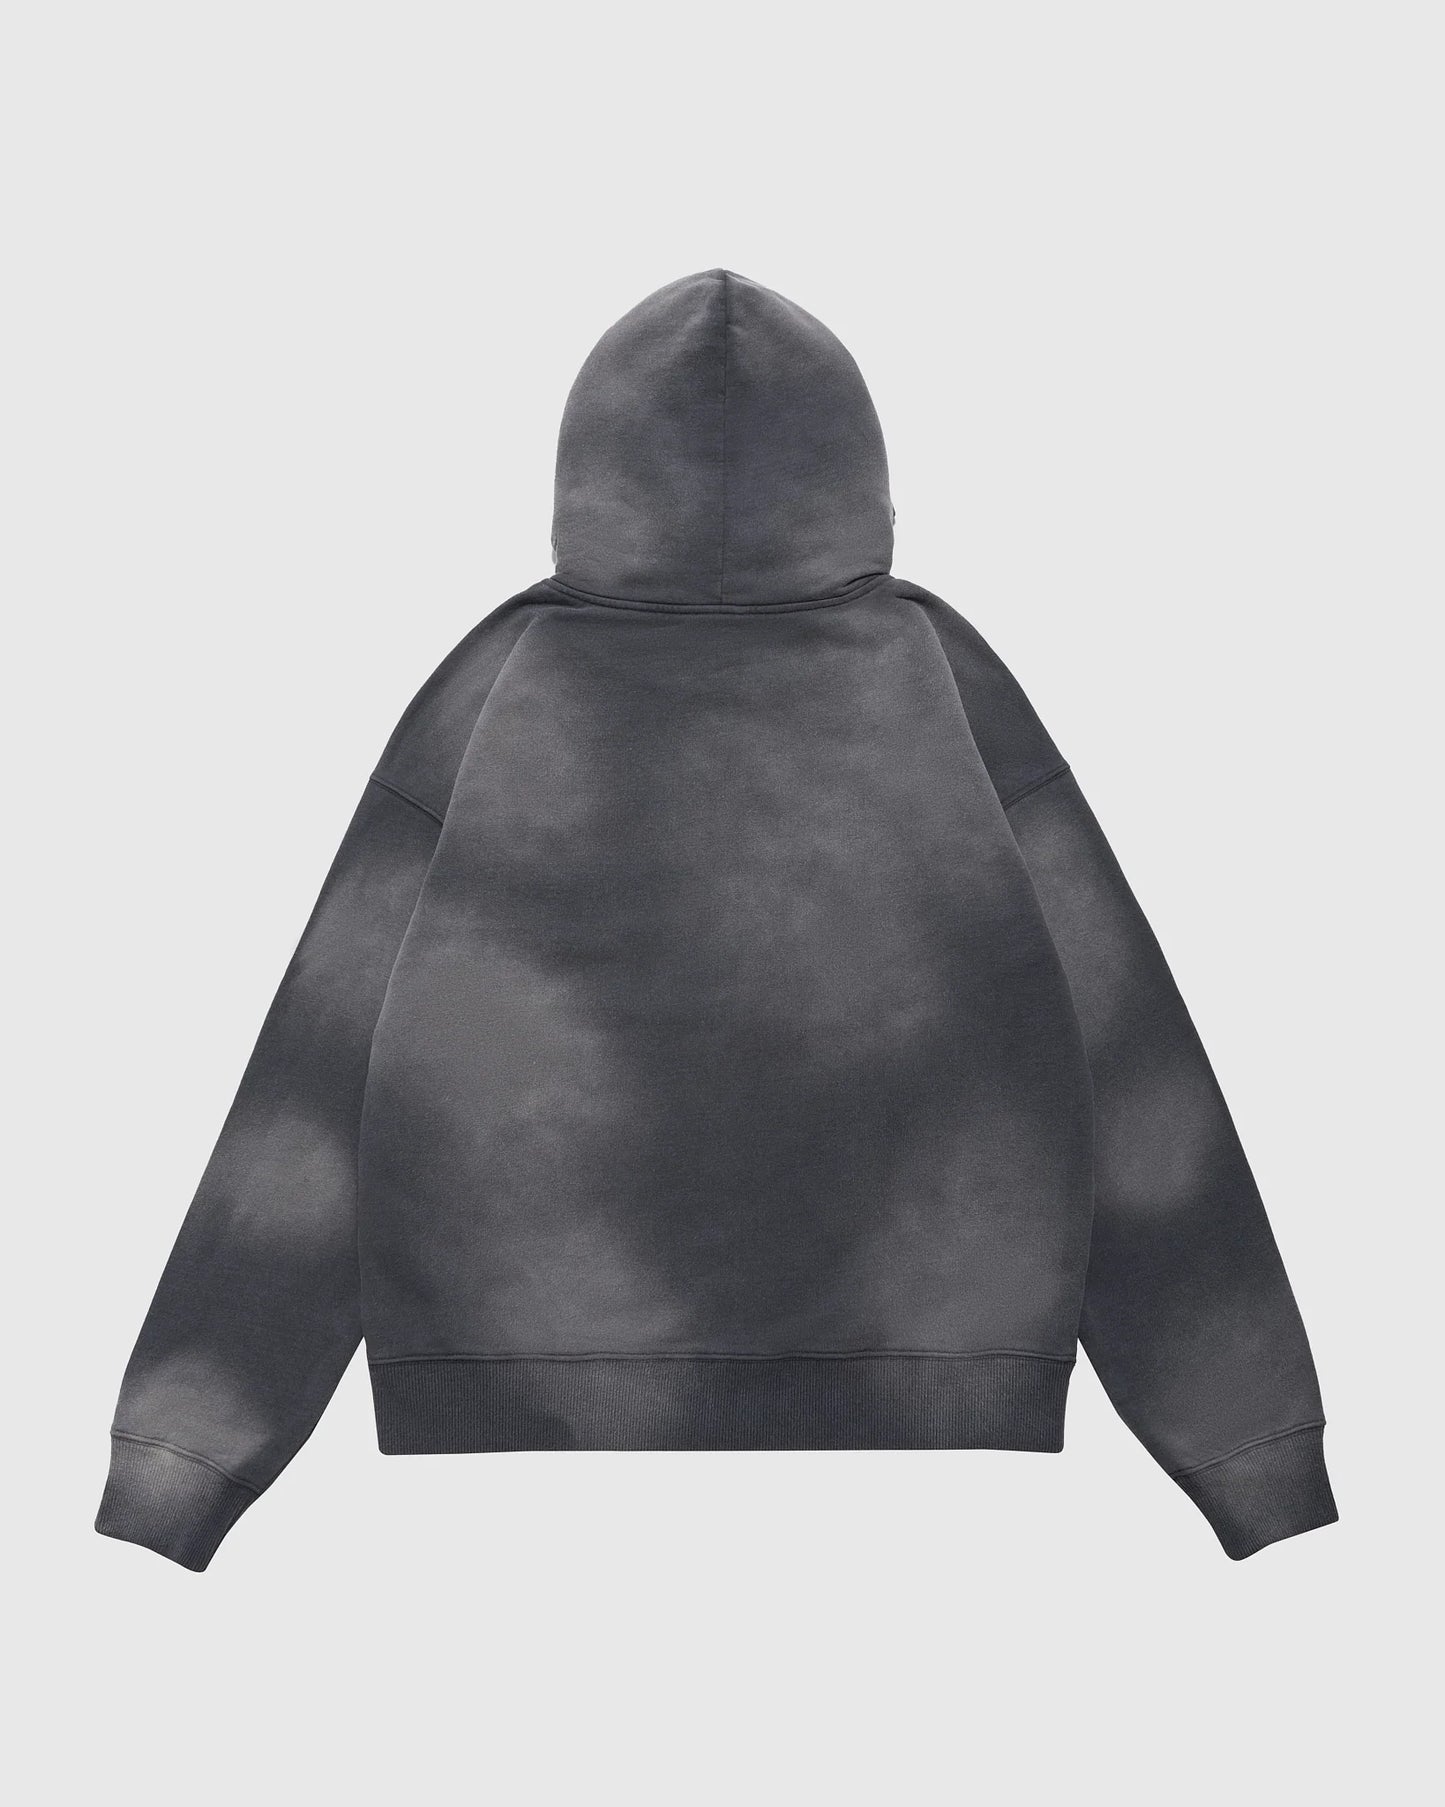 INCOGNITO Washed Grey Superstar Hoodie